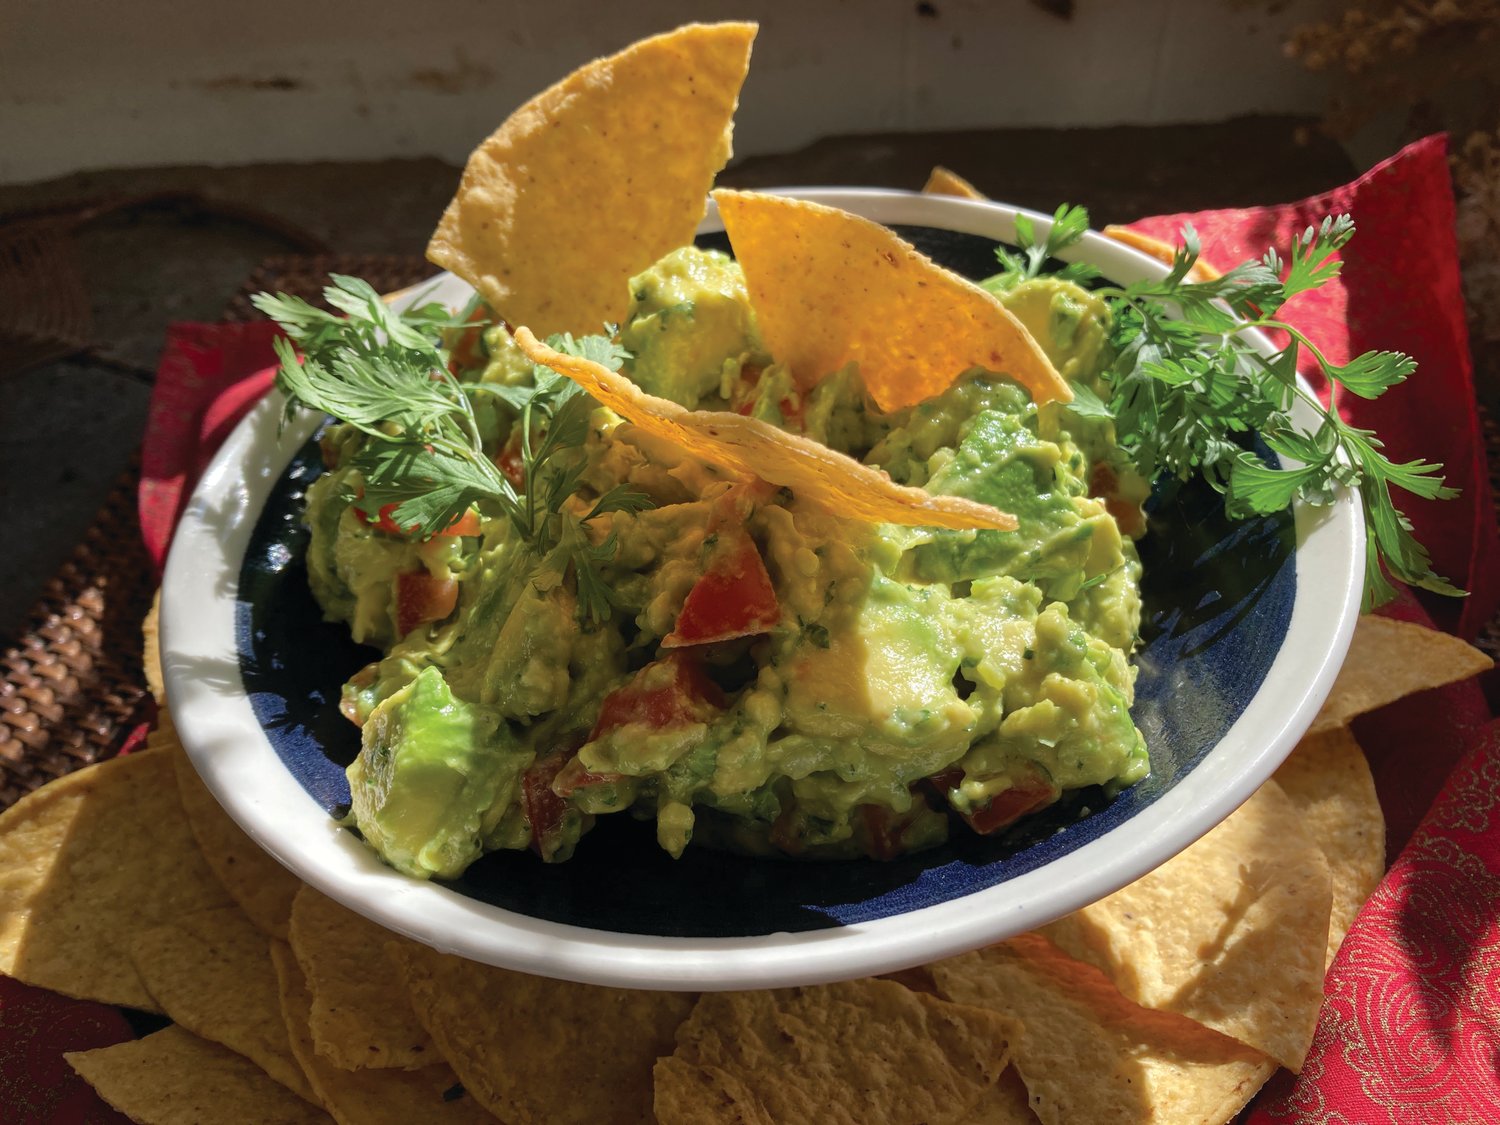 Rosa Mexicano’s chunky guacamole can be served as a dip with corn chips, or a topper for fajitas and tacos.